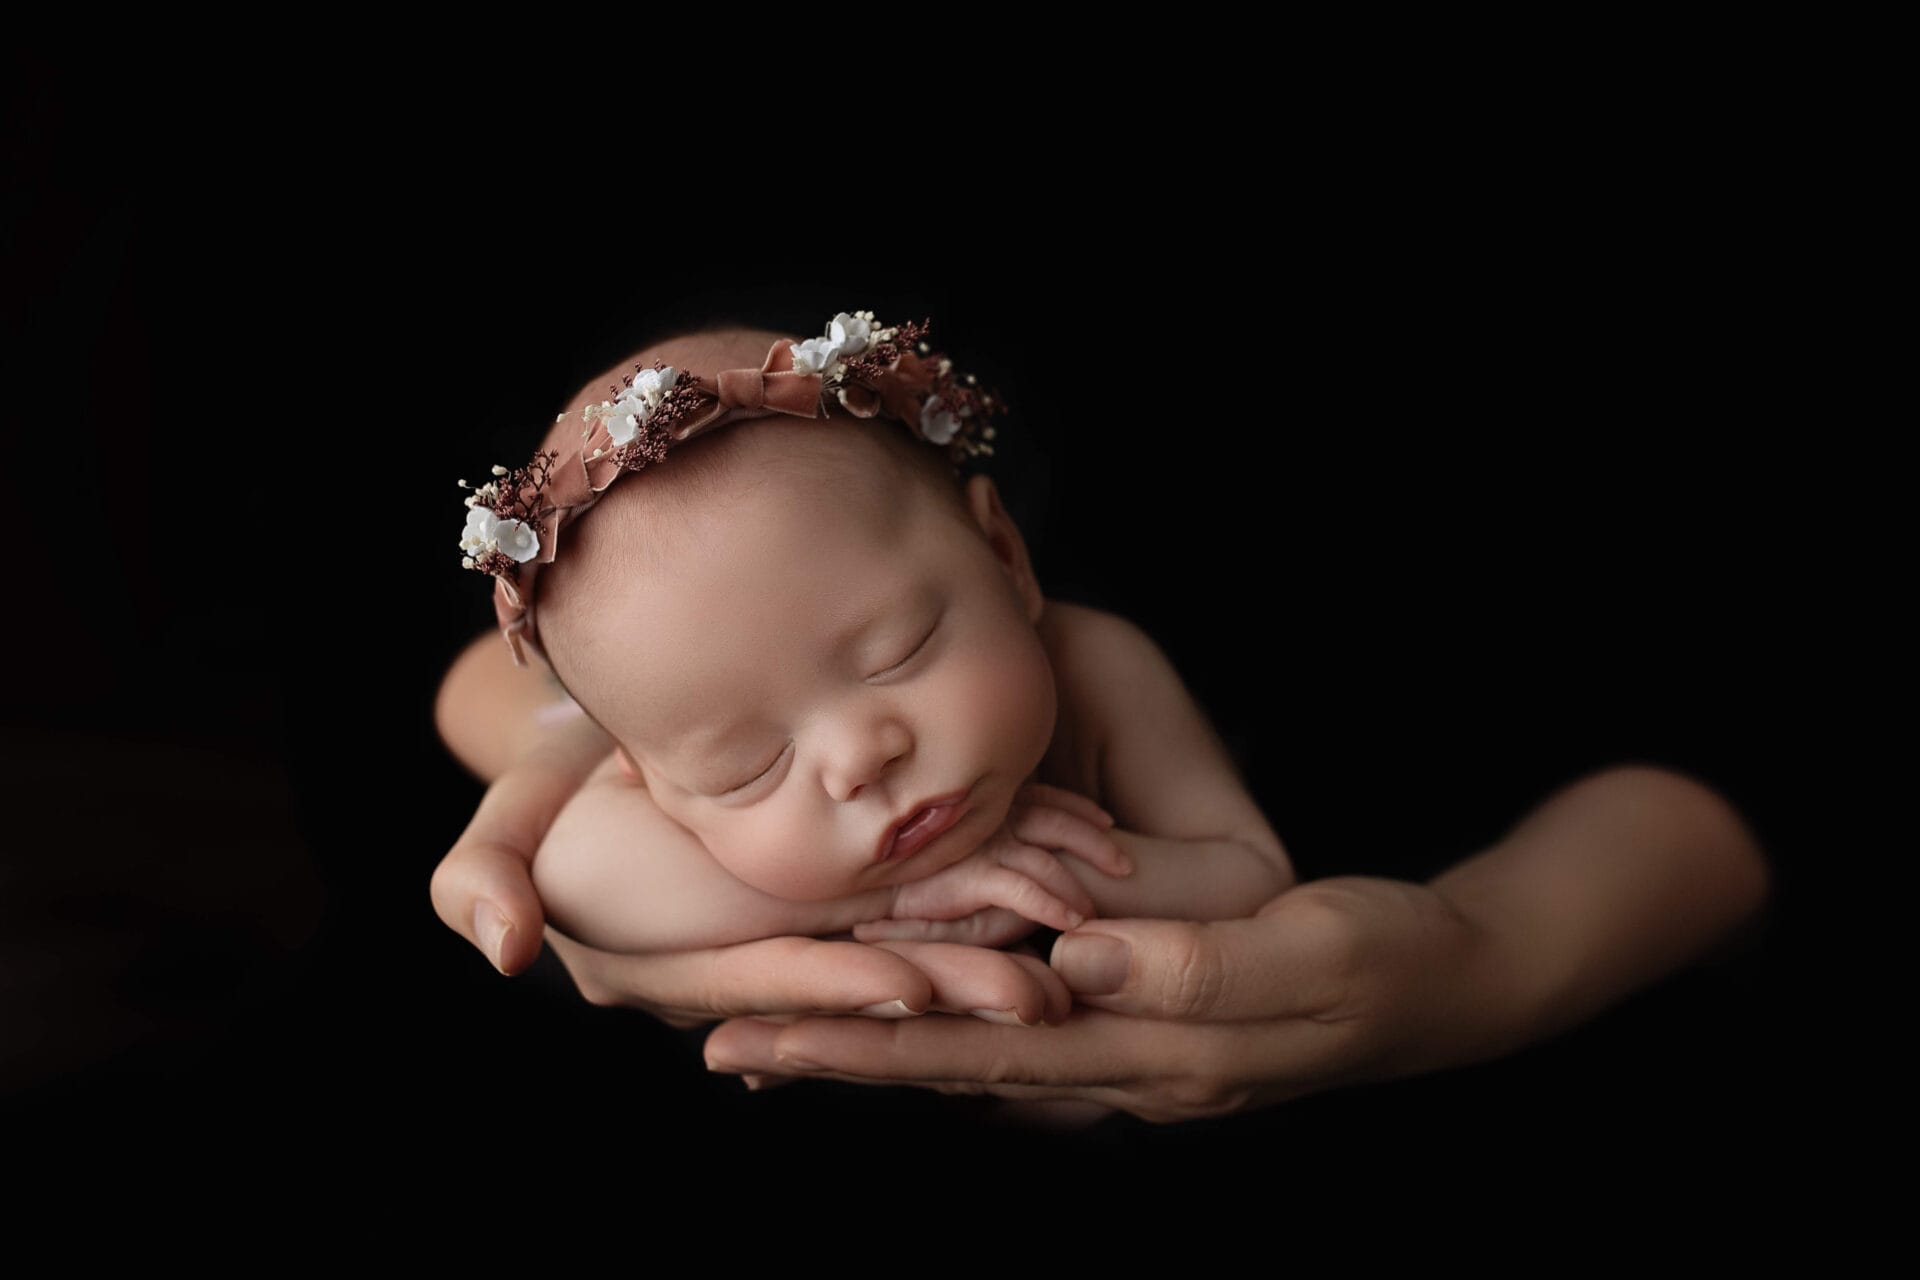 A newborn baby girl posed in her mom's hand on a black backdrop, wearing a pink floral headband.